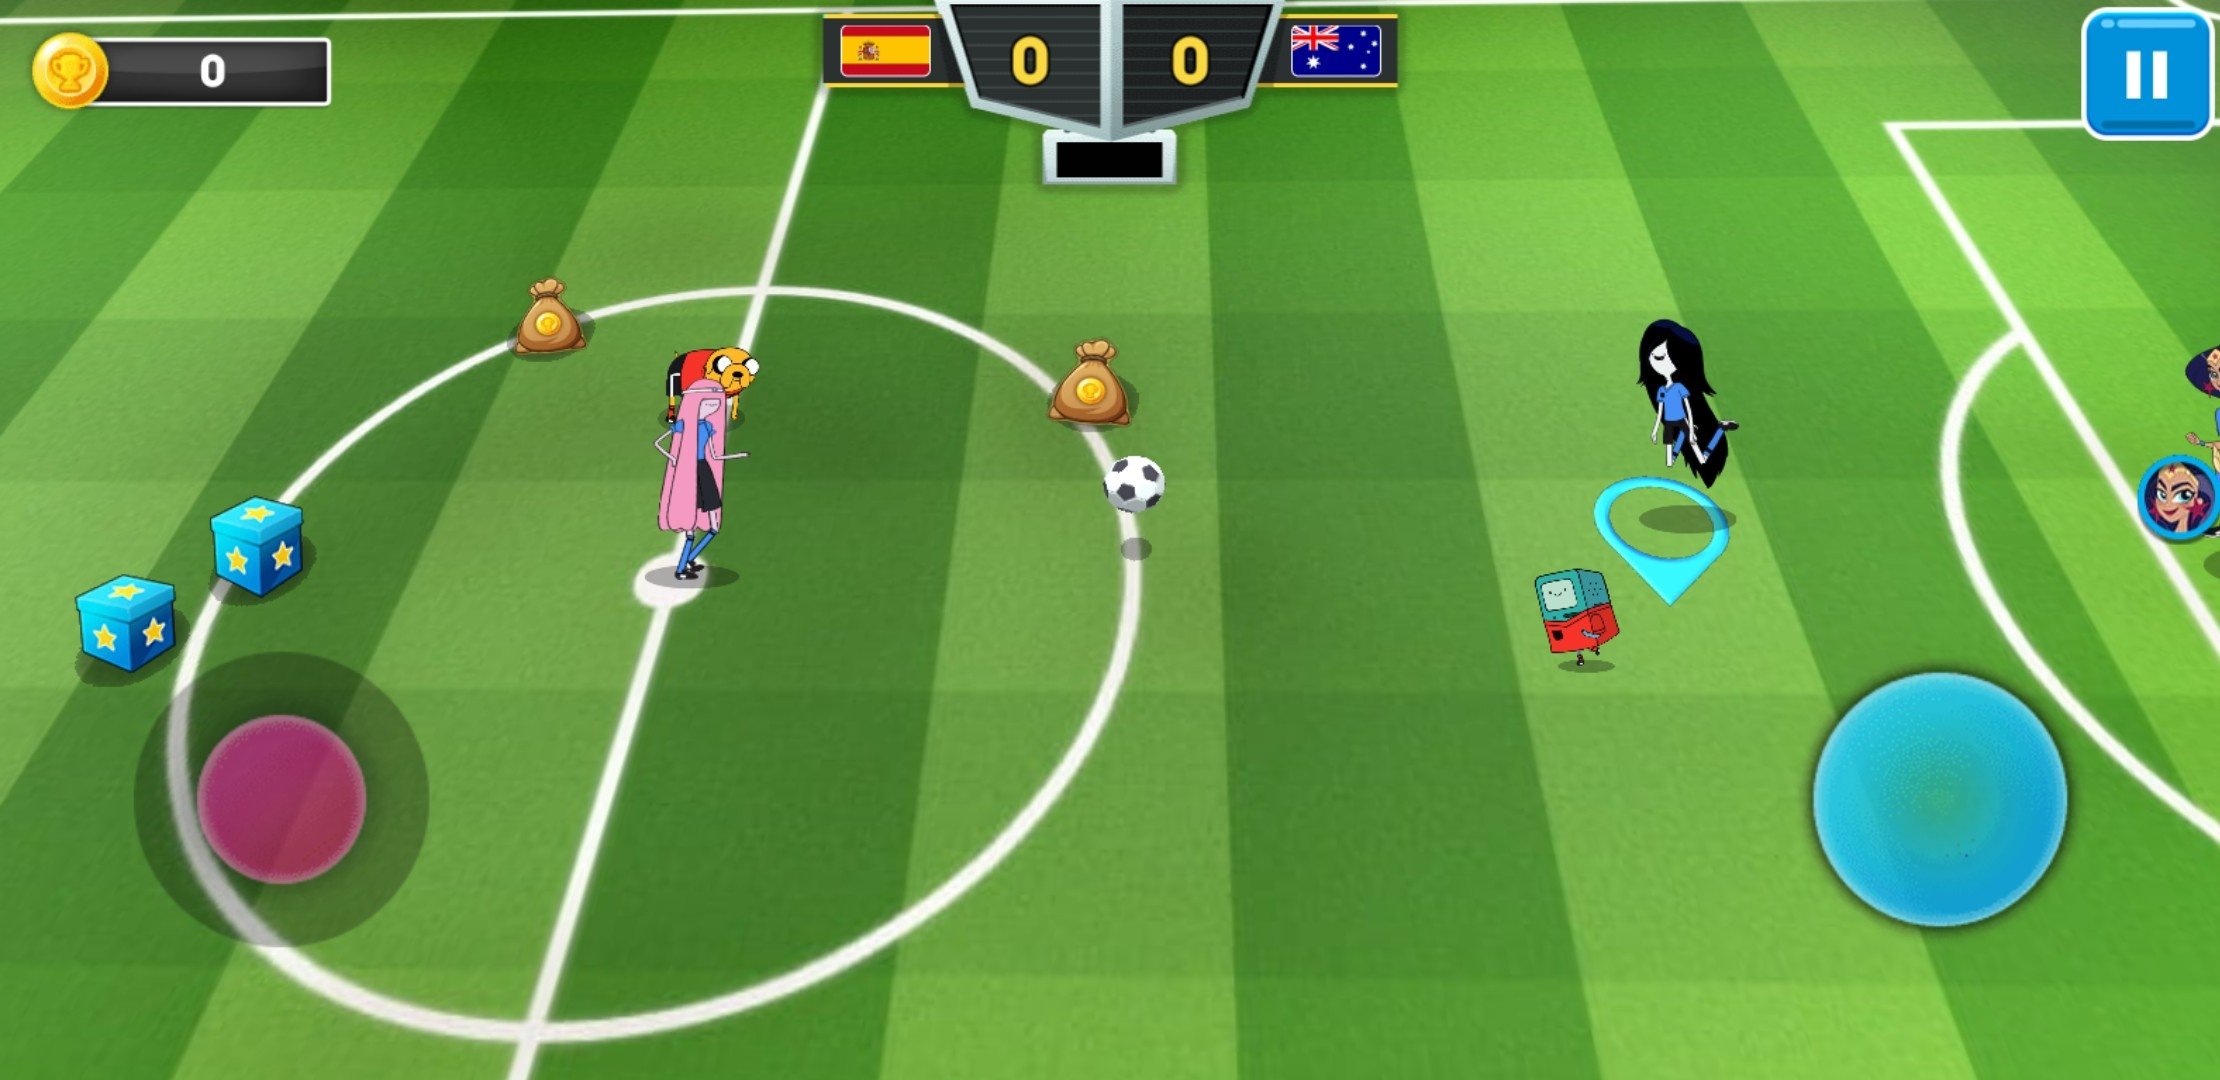 Toon Cup 2021 APK download - Toon Cup 2021 for Android Free